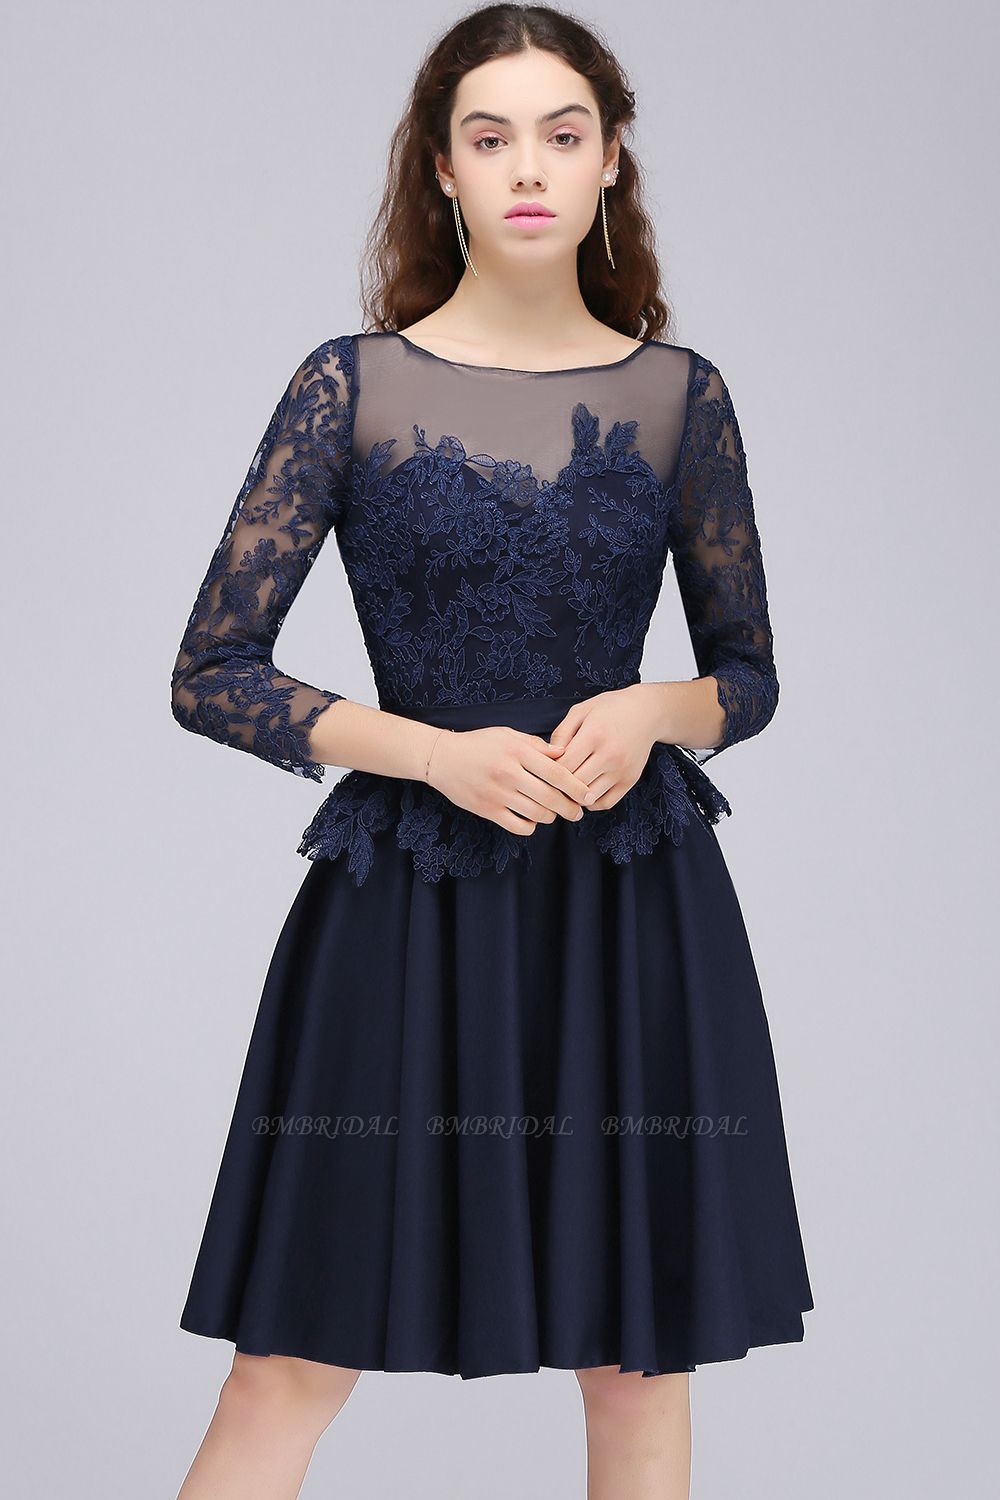 BMbridal Modest 3/4 Sleeves Short Navy Lace Bridesmaid Dresses with Appliques